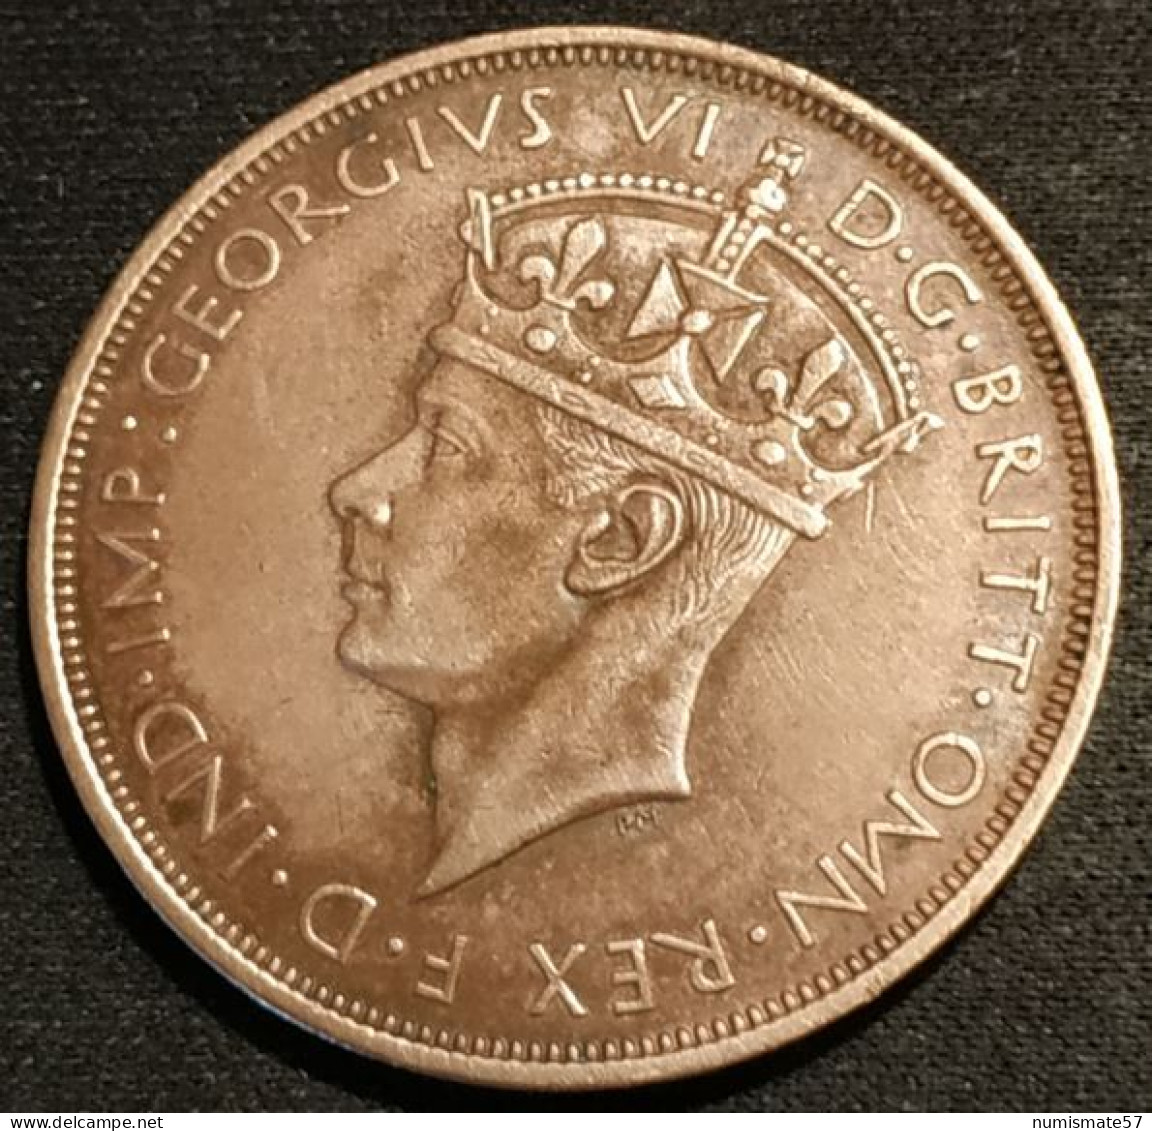 JERSEY - 1/12 SHILLING 1937 - George VI - KM 18 - ONE·TWELFTH·OF·A·SHILLING - Jersey